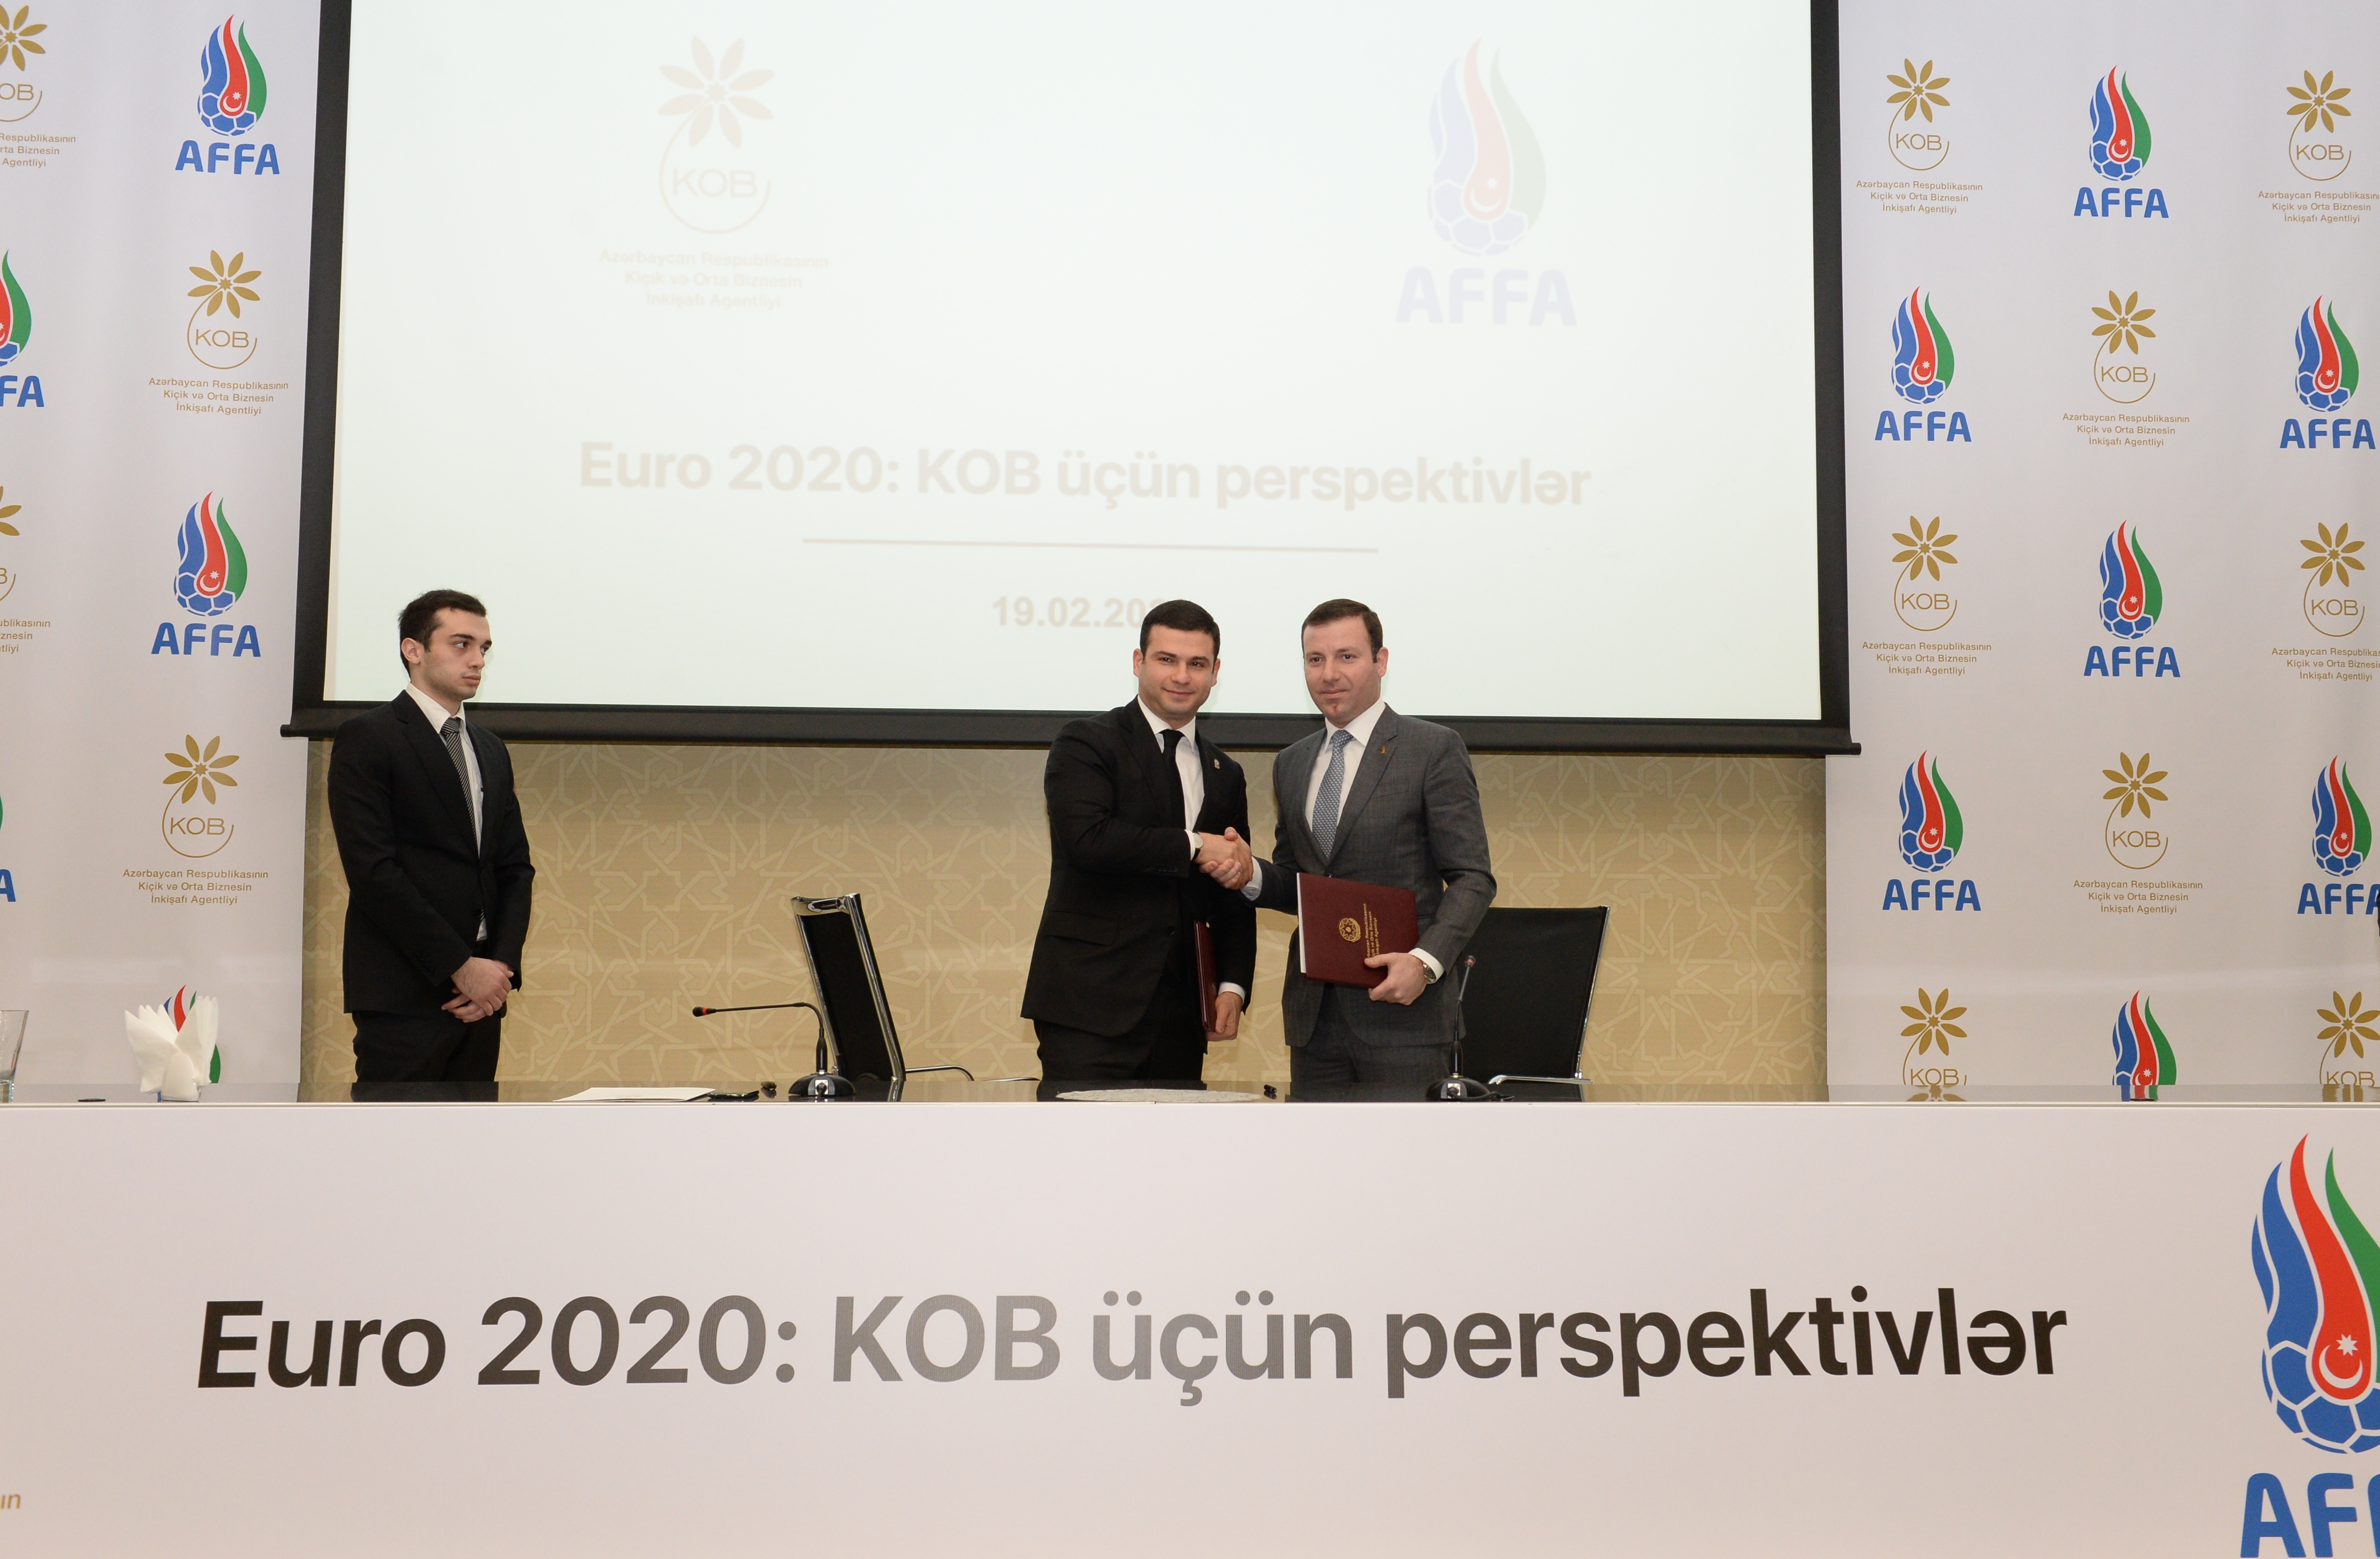 Euro-2020 games to create promising opportunities for SMBs 